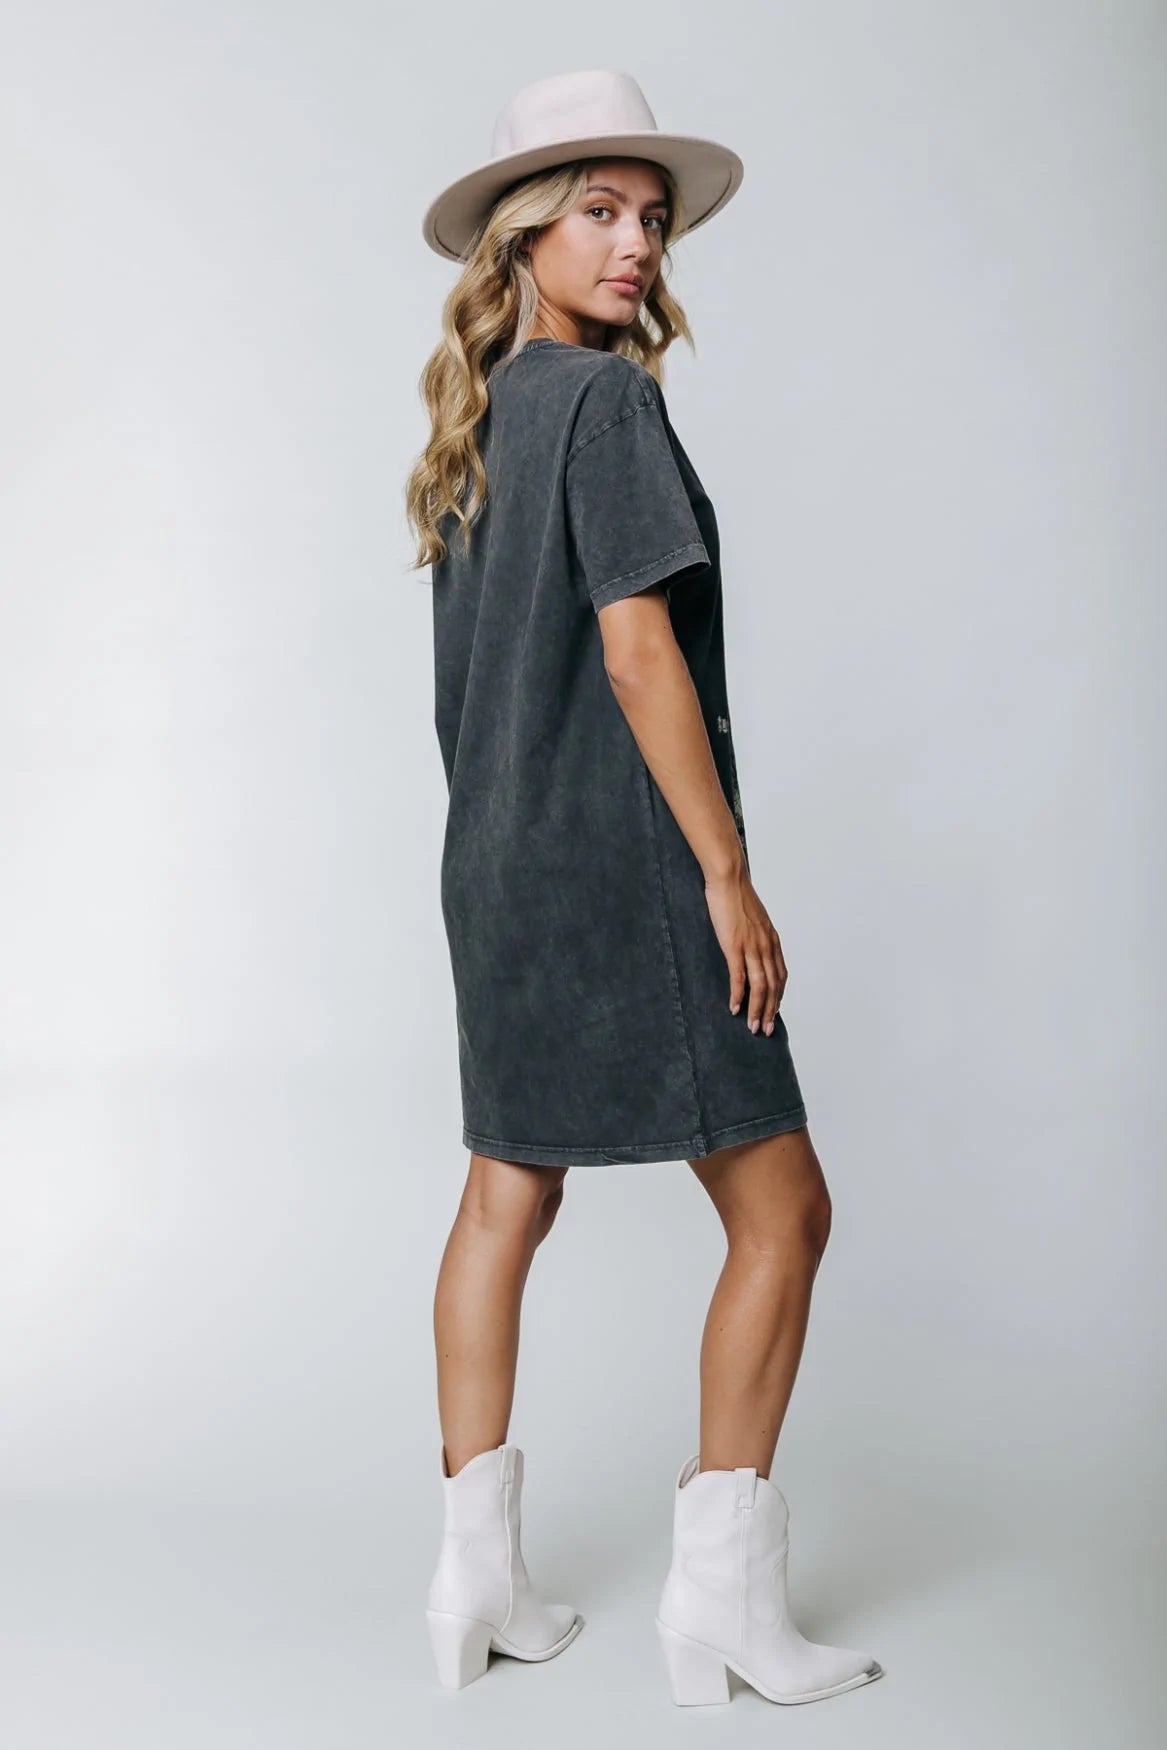 Lost in Paradise tee dress